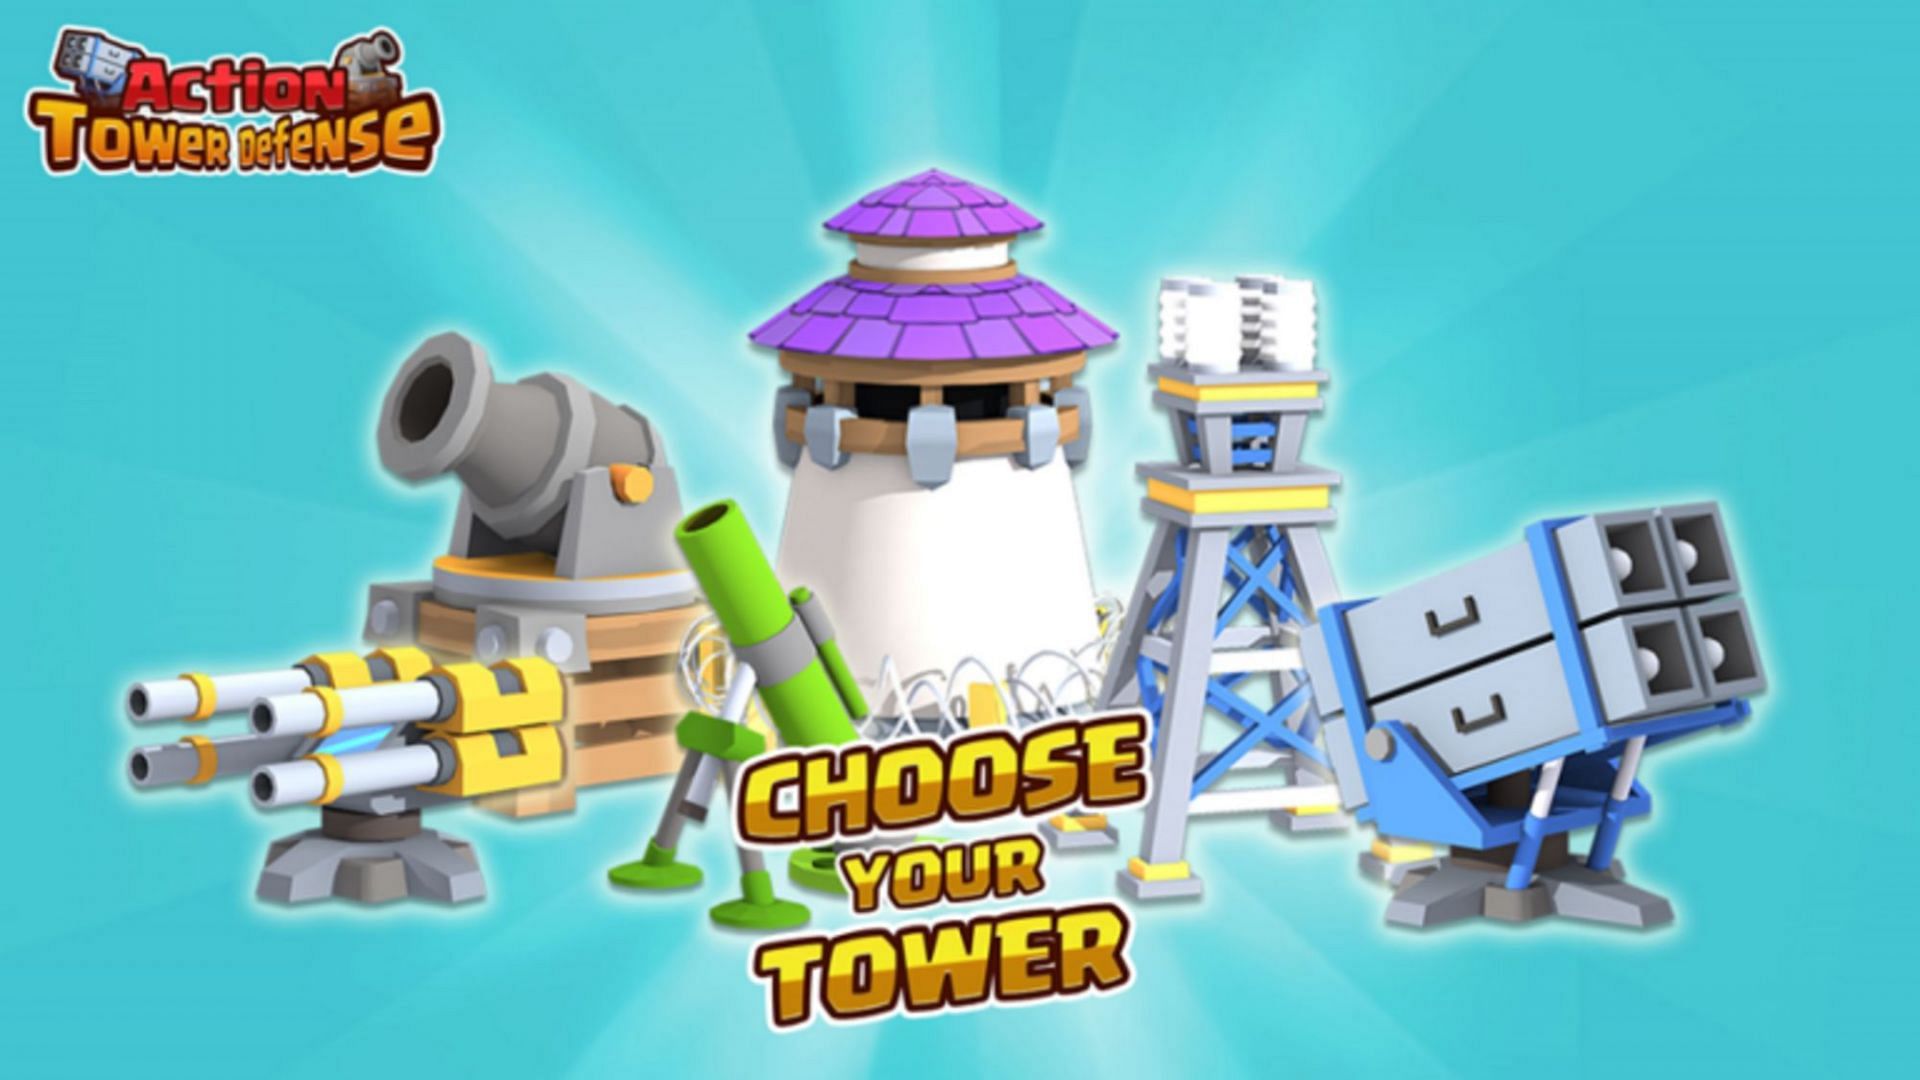 Roblox Action Tower Defense codes (May 2022): Free coins and boosts